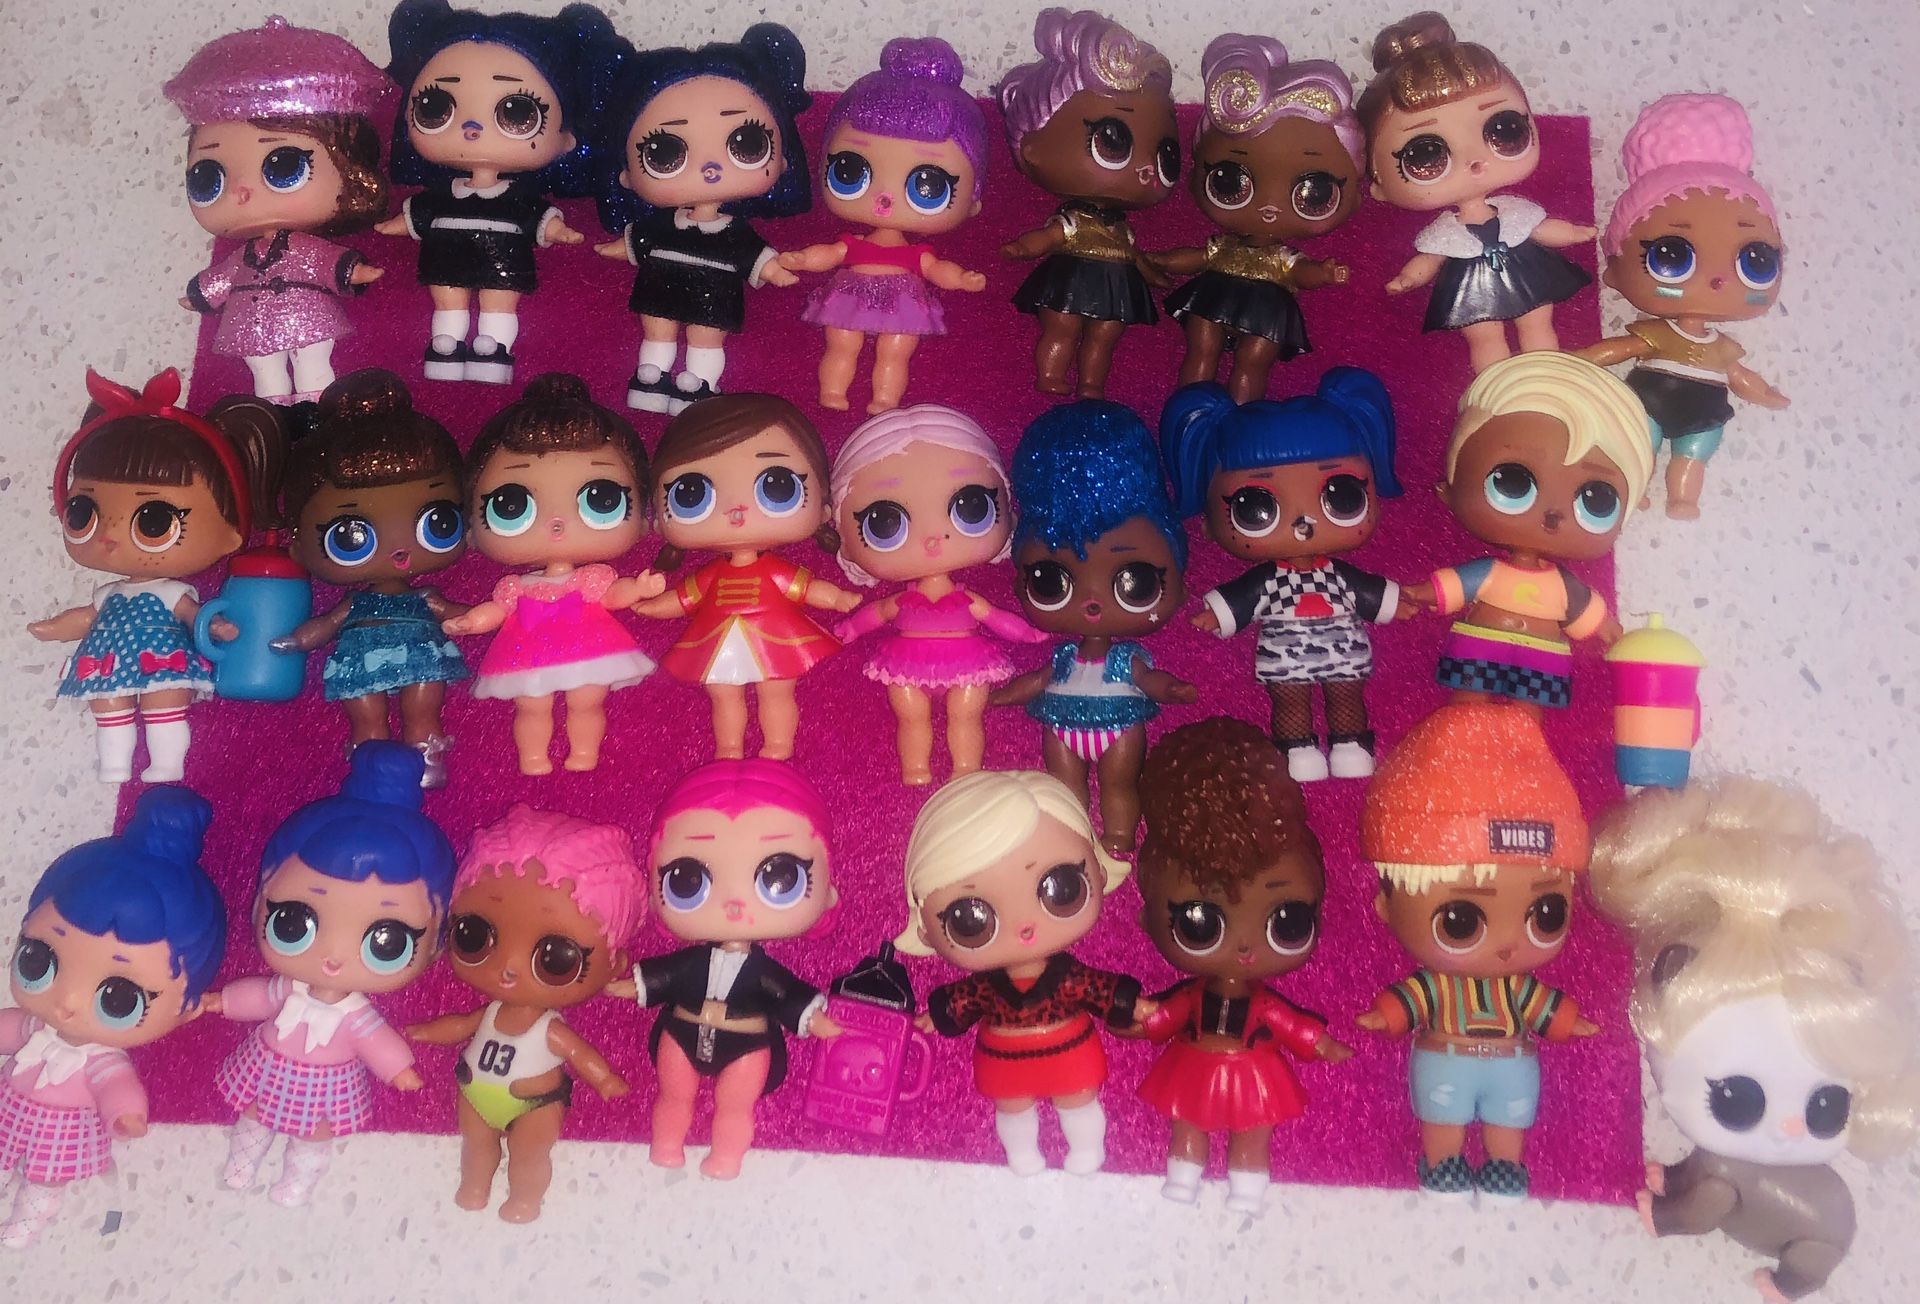 Lol surprise dolls GUC / incomplete/ 5 to 10 each